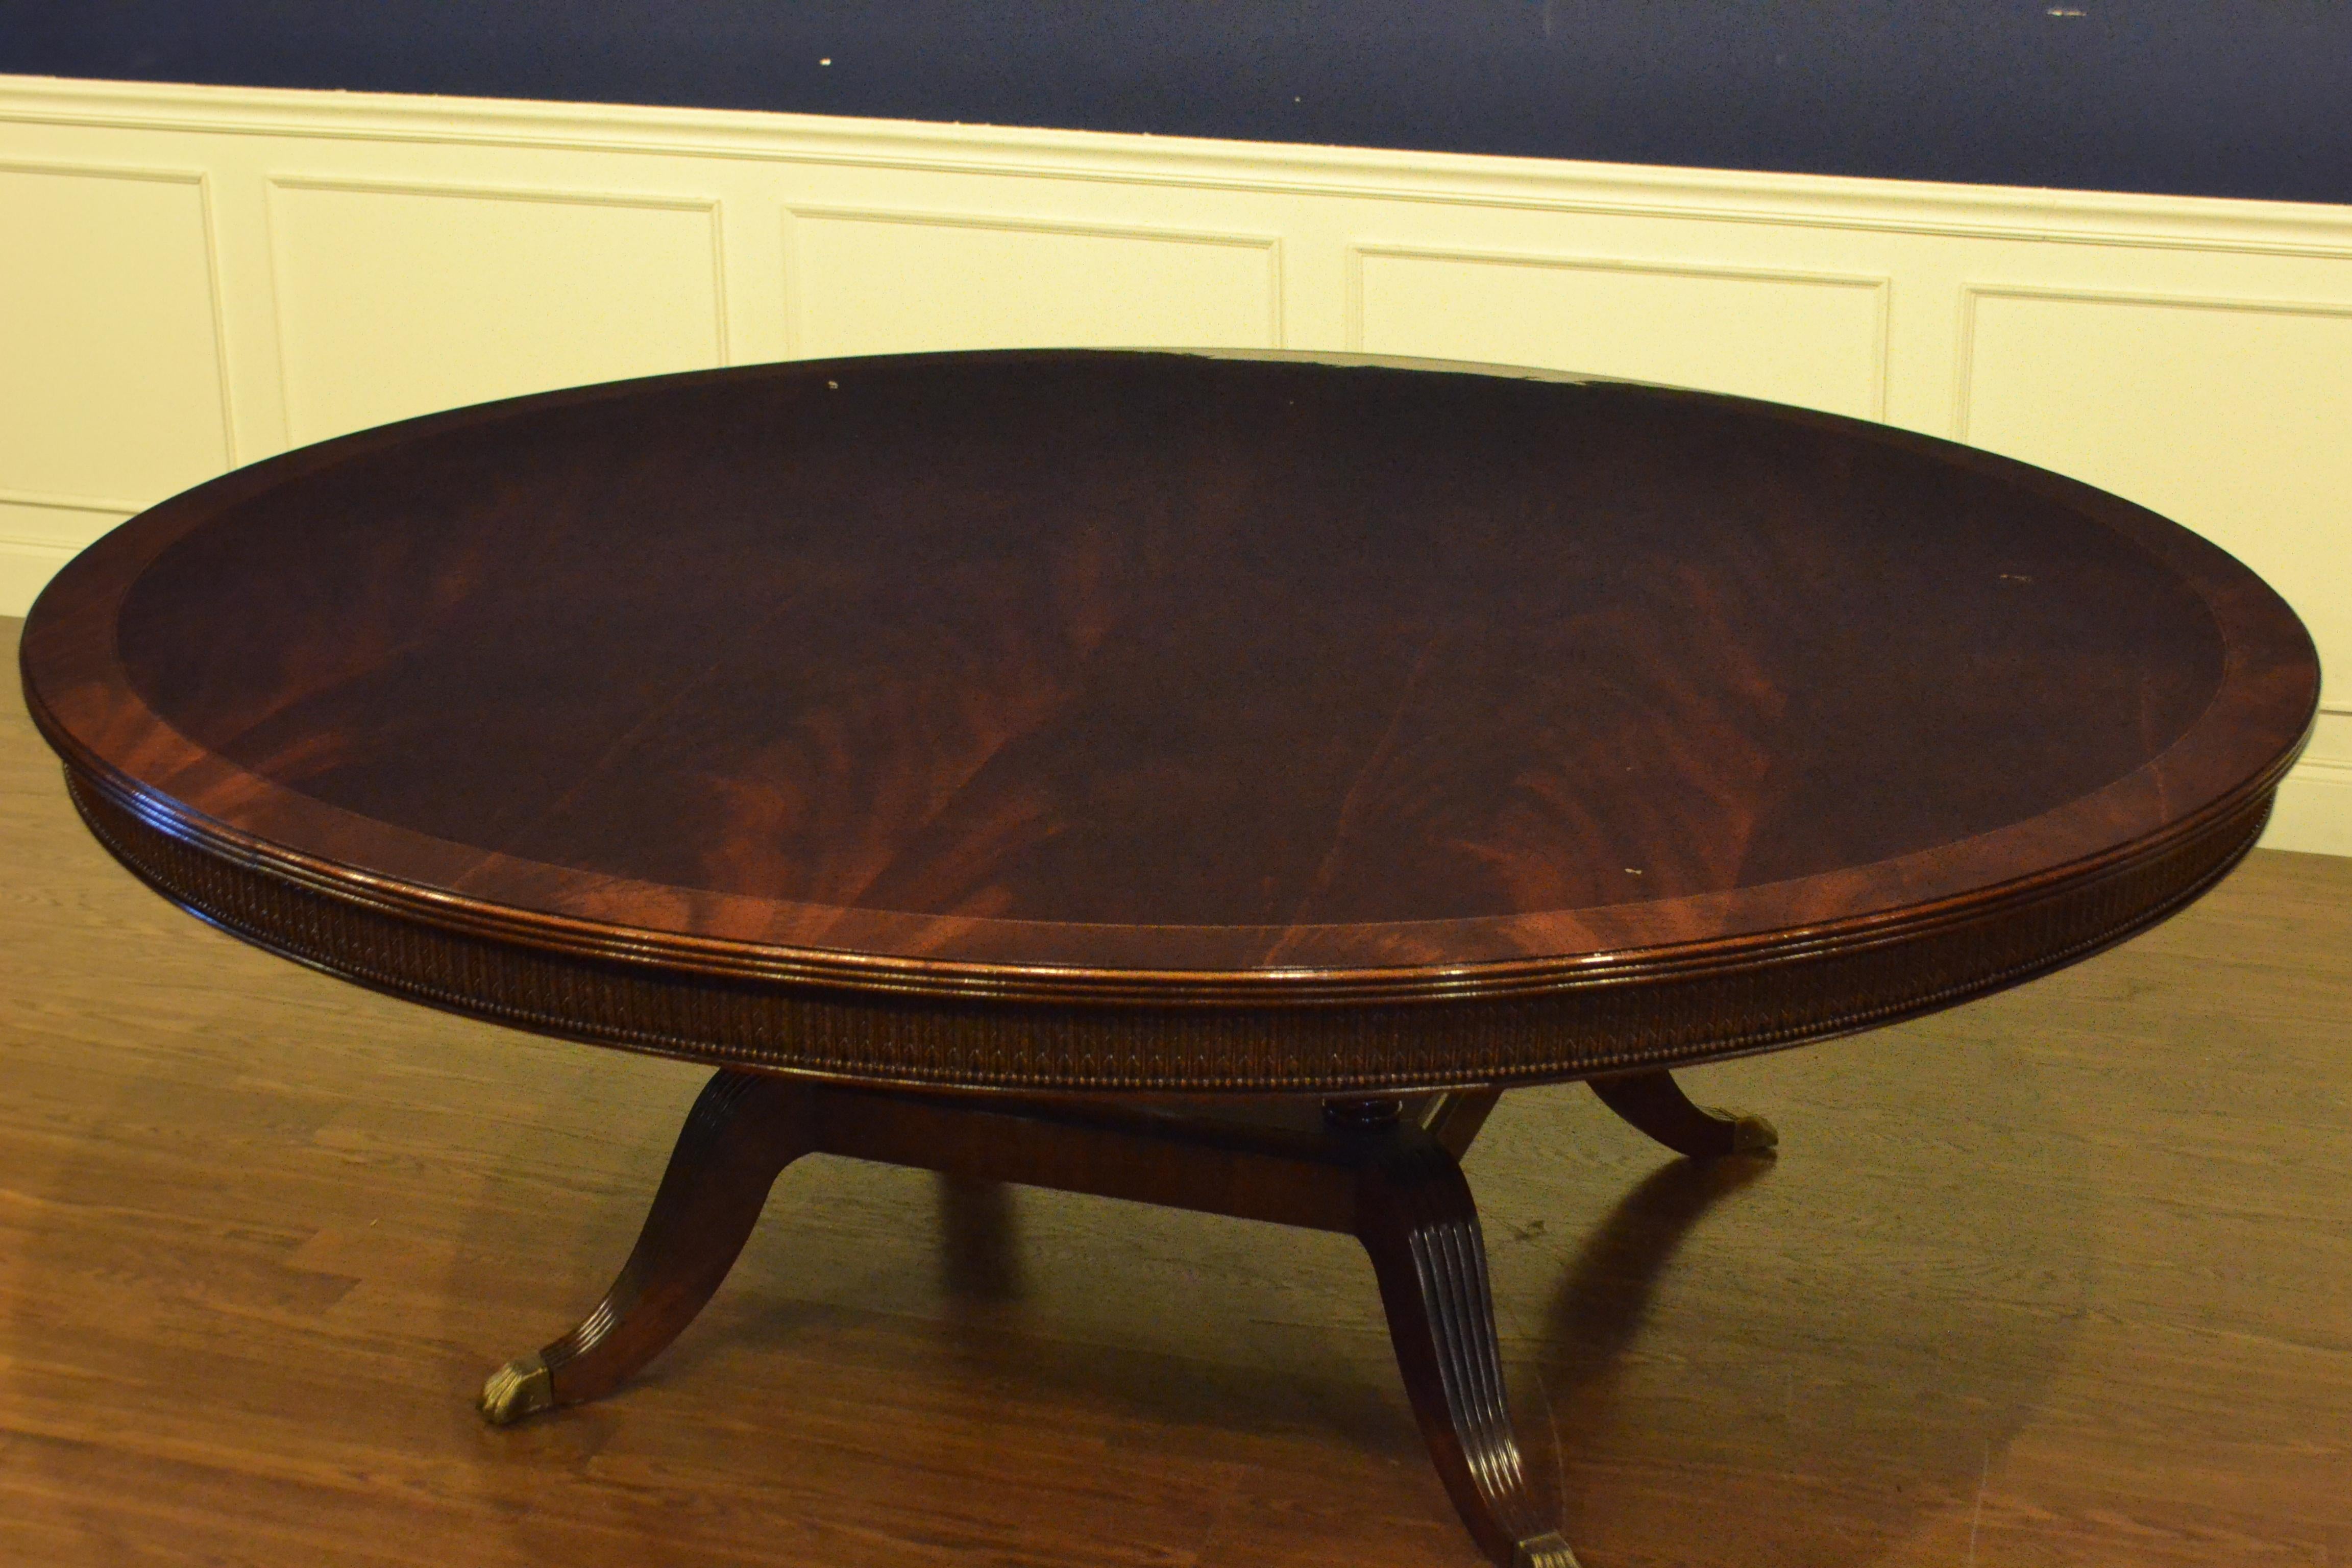 Contemporary Large Round Crotch Mahogany Regency Style Dining Table by Leighton Hall For Sale